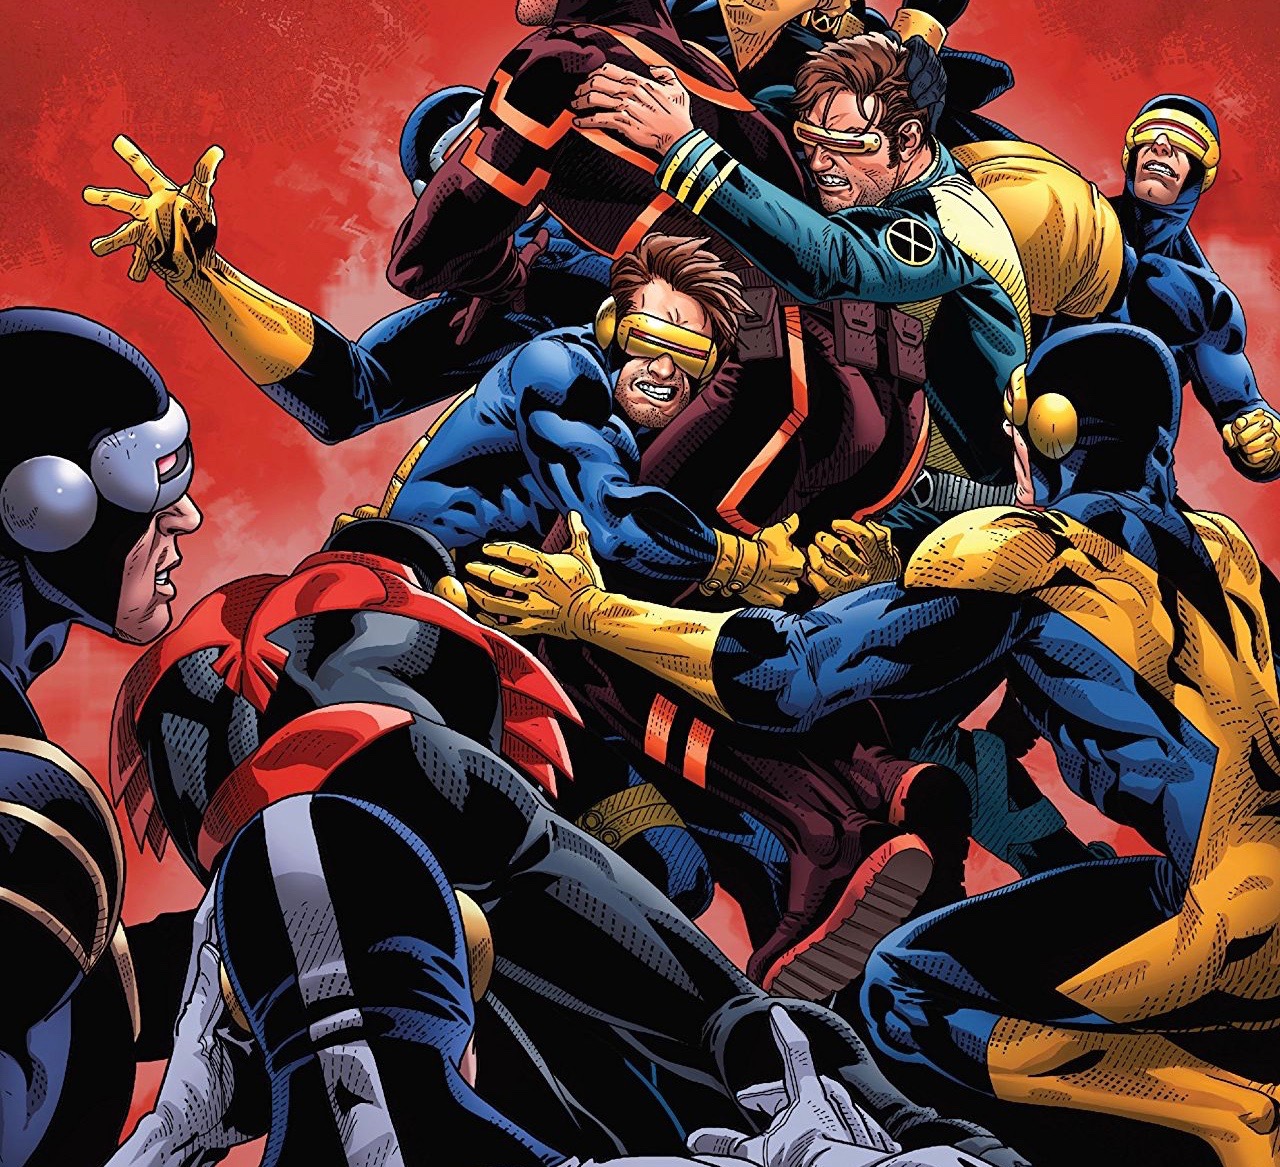 X-Men: Summers and Winter Review